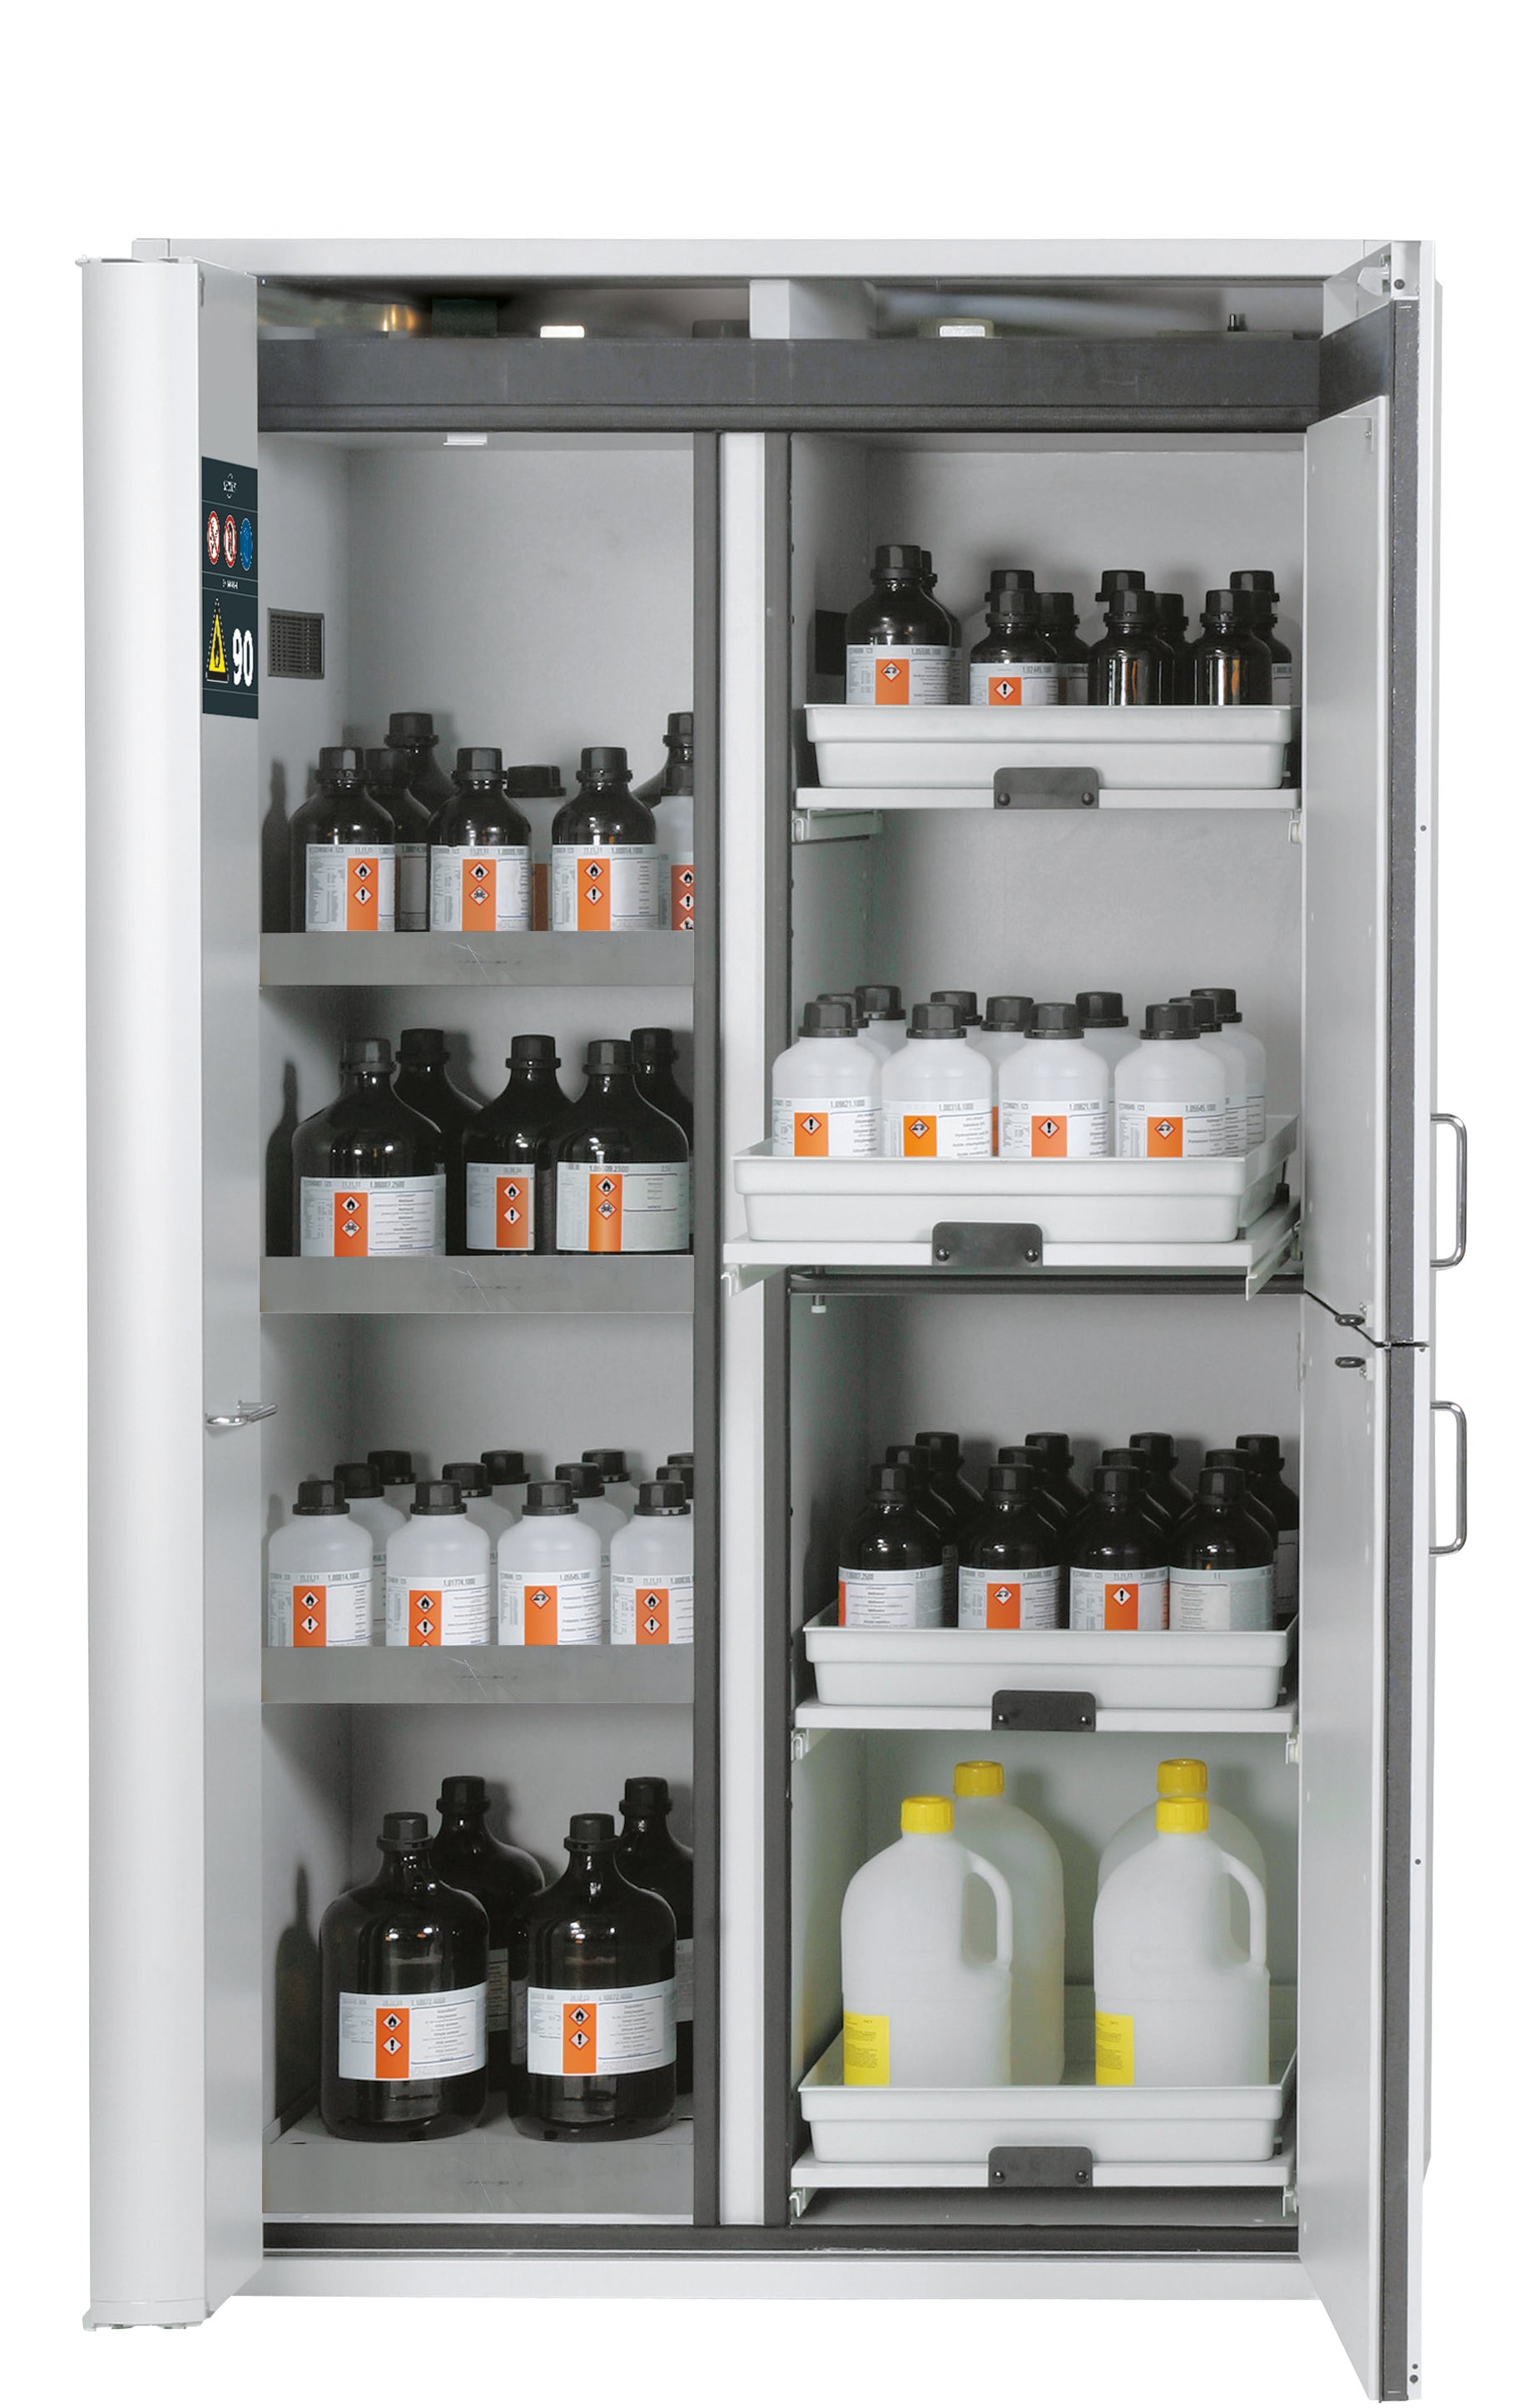 Type 90 combination safety cabinet K-PHOENIX-90 model K90.196.120.MF.FWAS in light gray RAL 7035 with 3x standard shelves (stainless steel 1.4301)